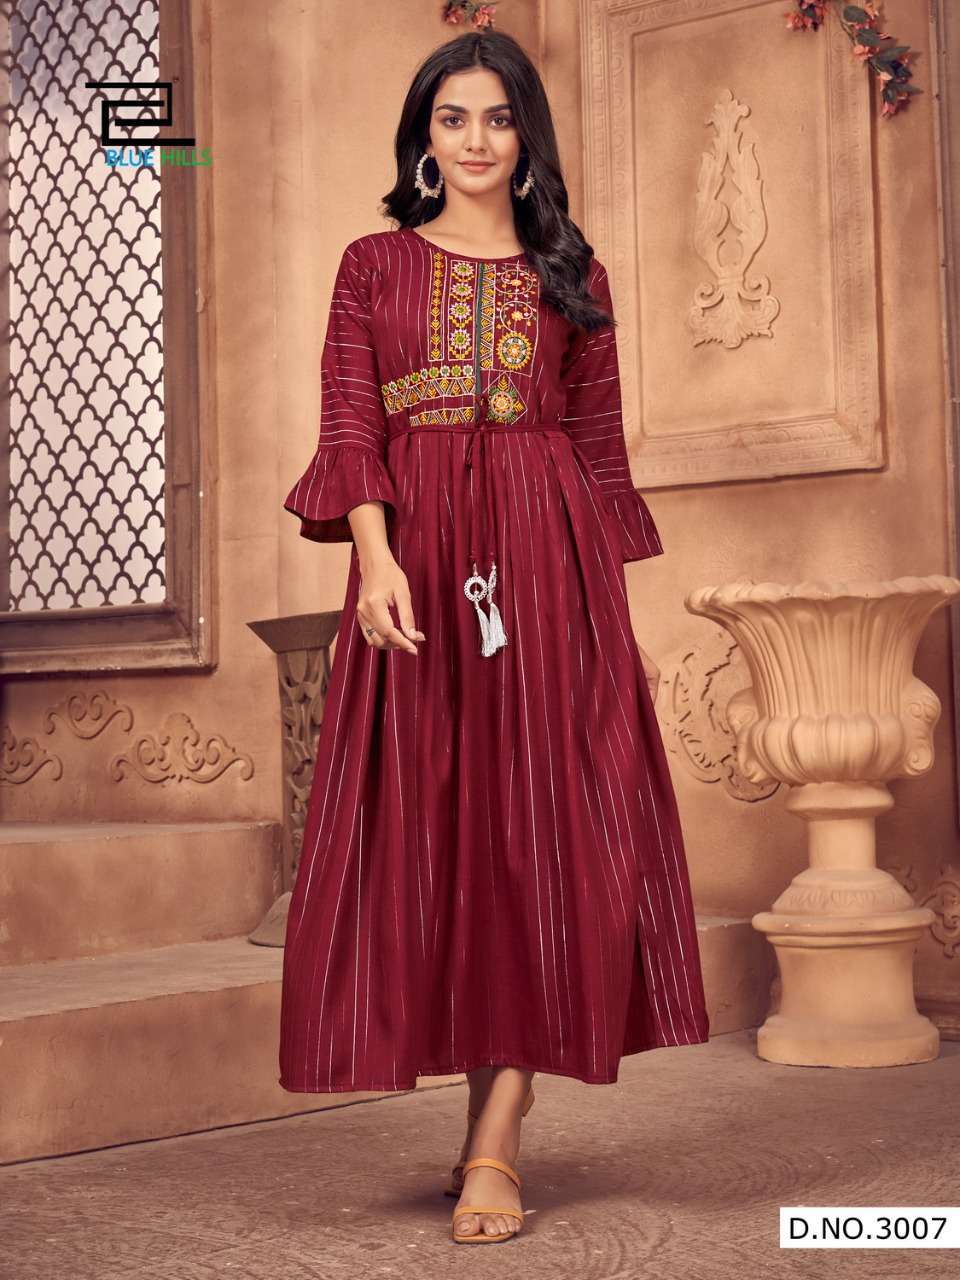 Blue hills presents Suman Rayon long gown style kurtis catalog collection 